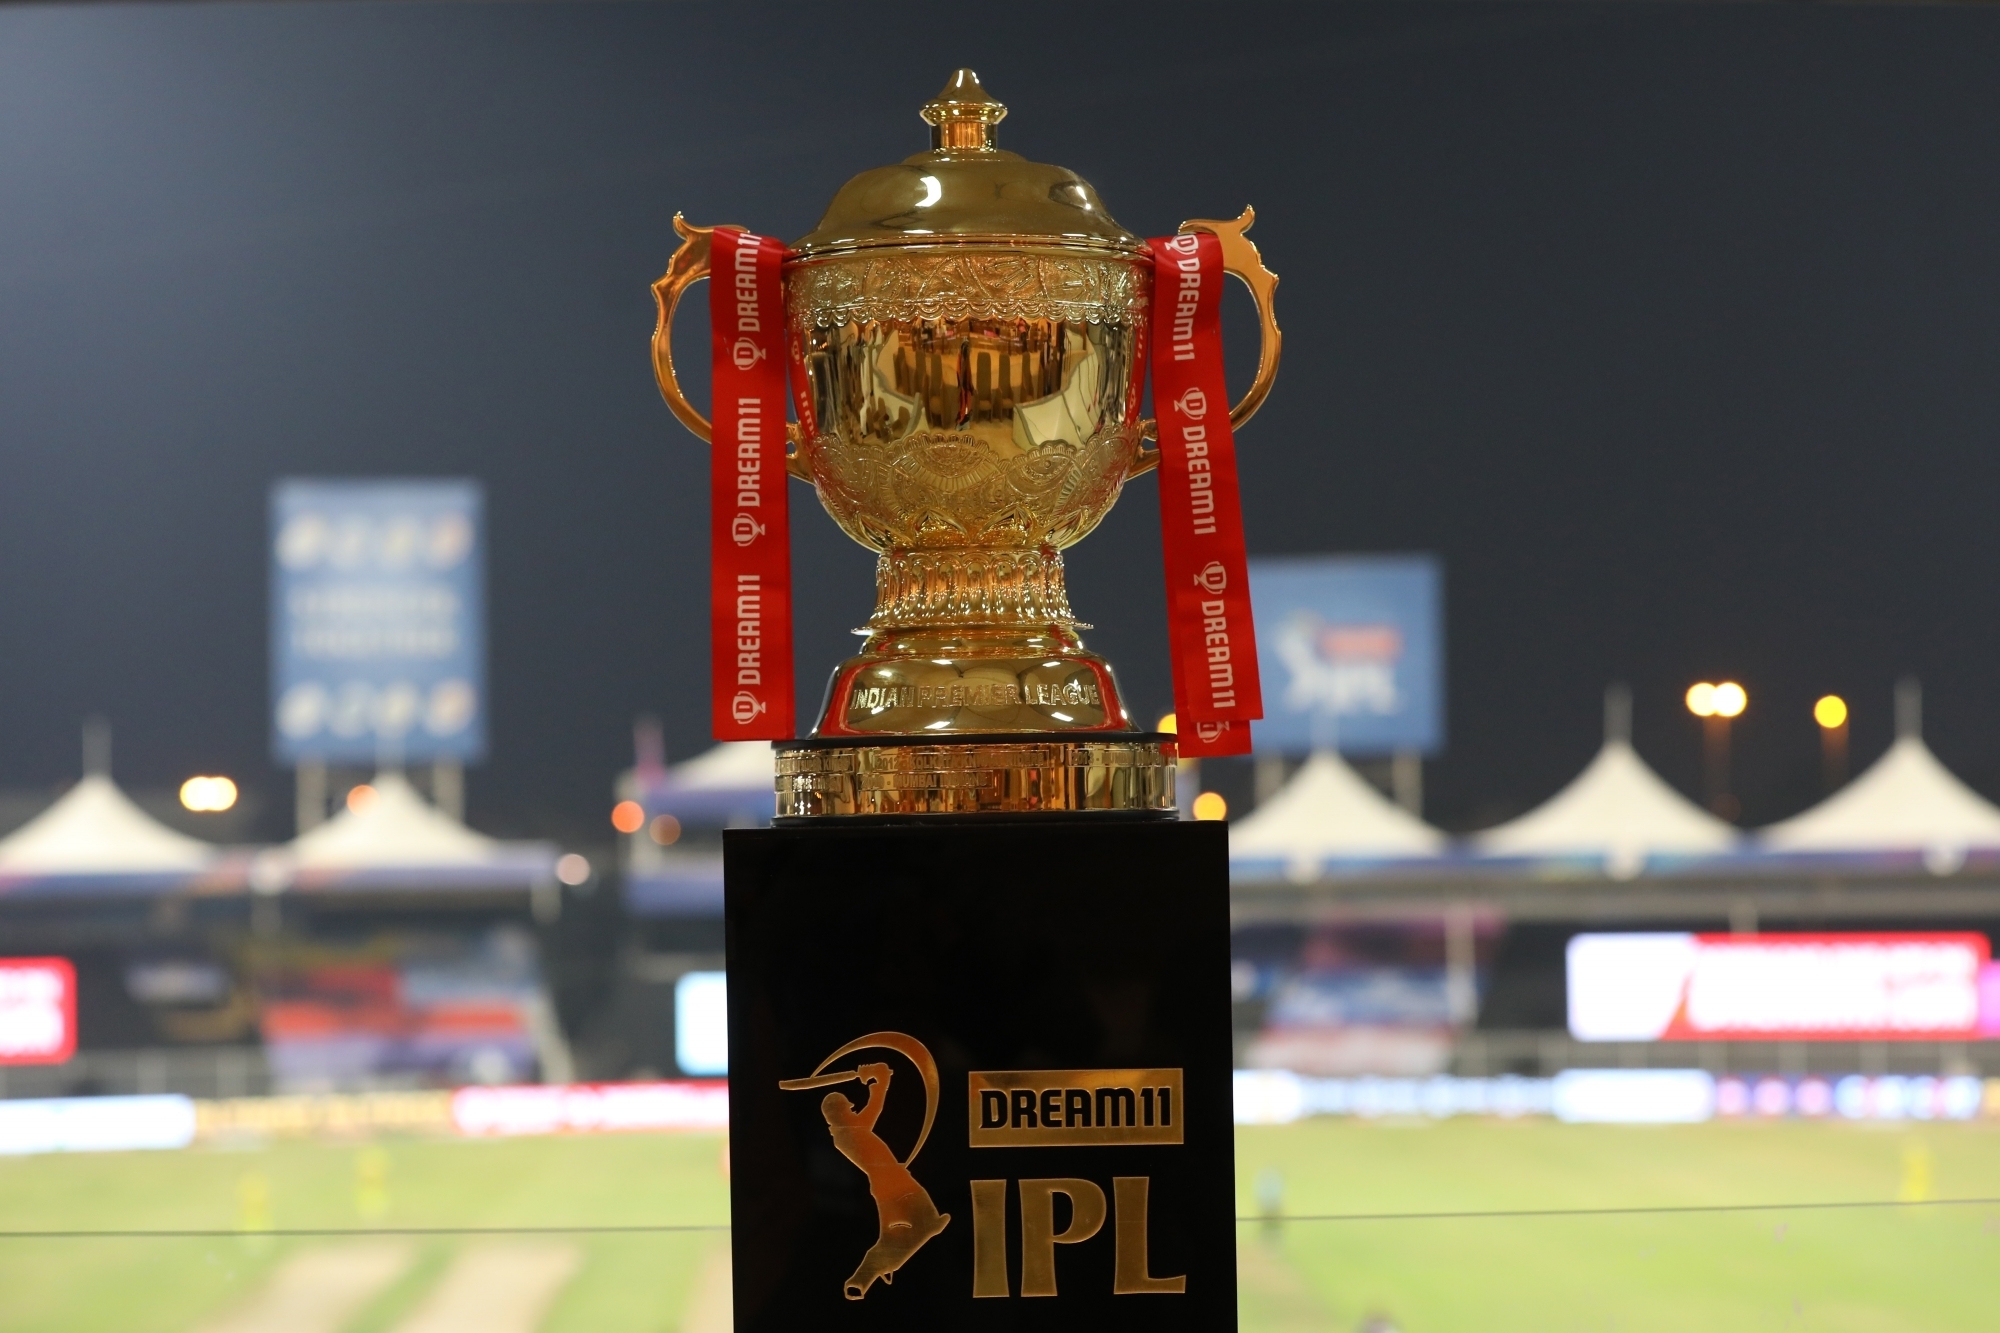 The IPL 2020 has been amazing so far as far as surprises and entertainment goes